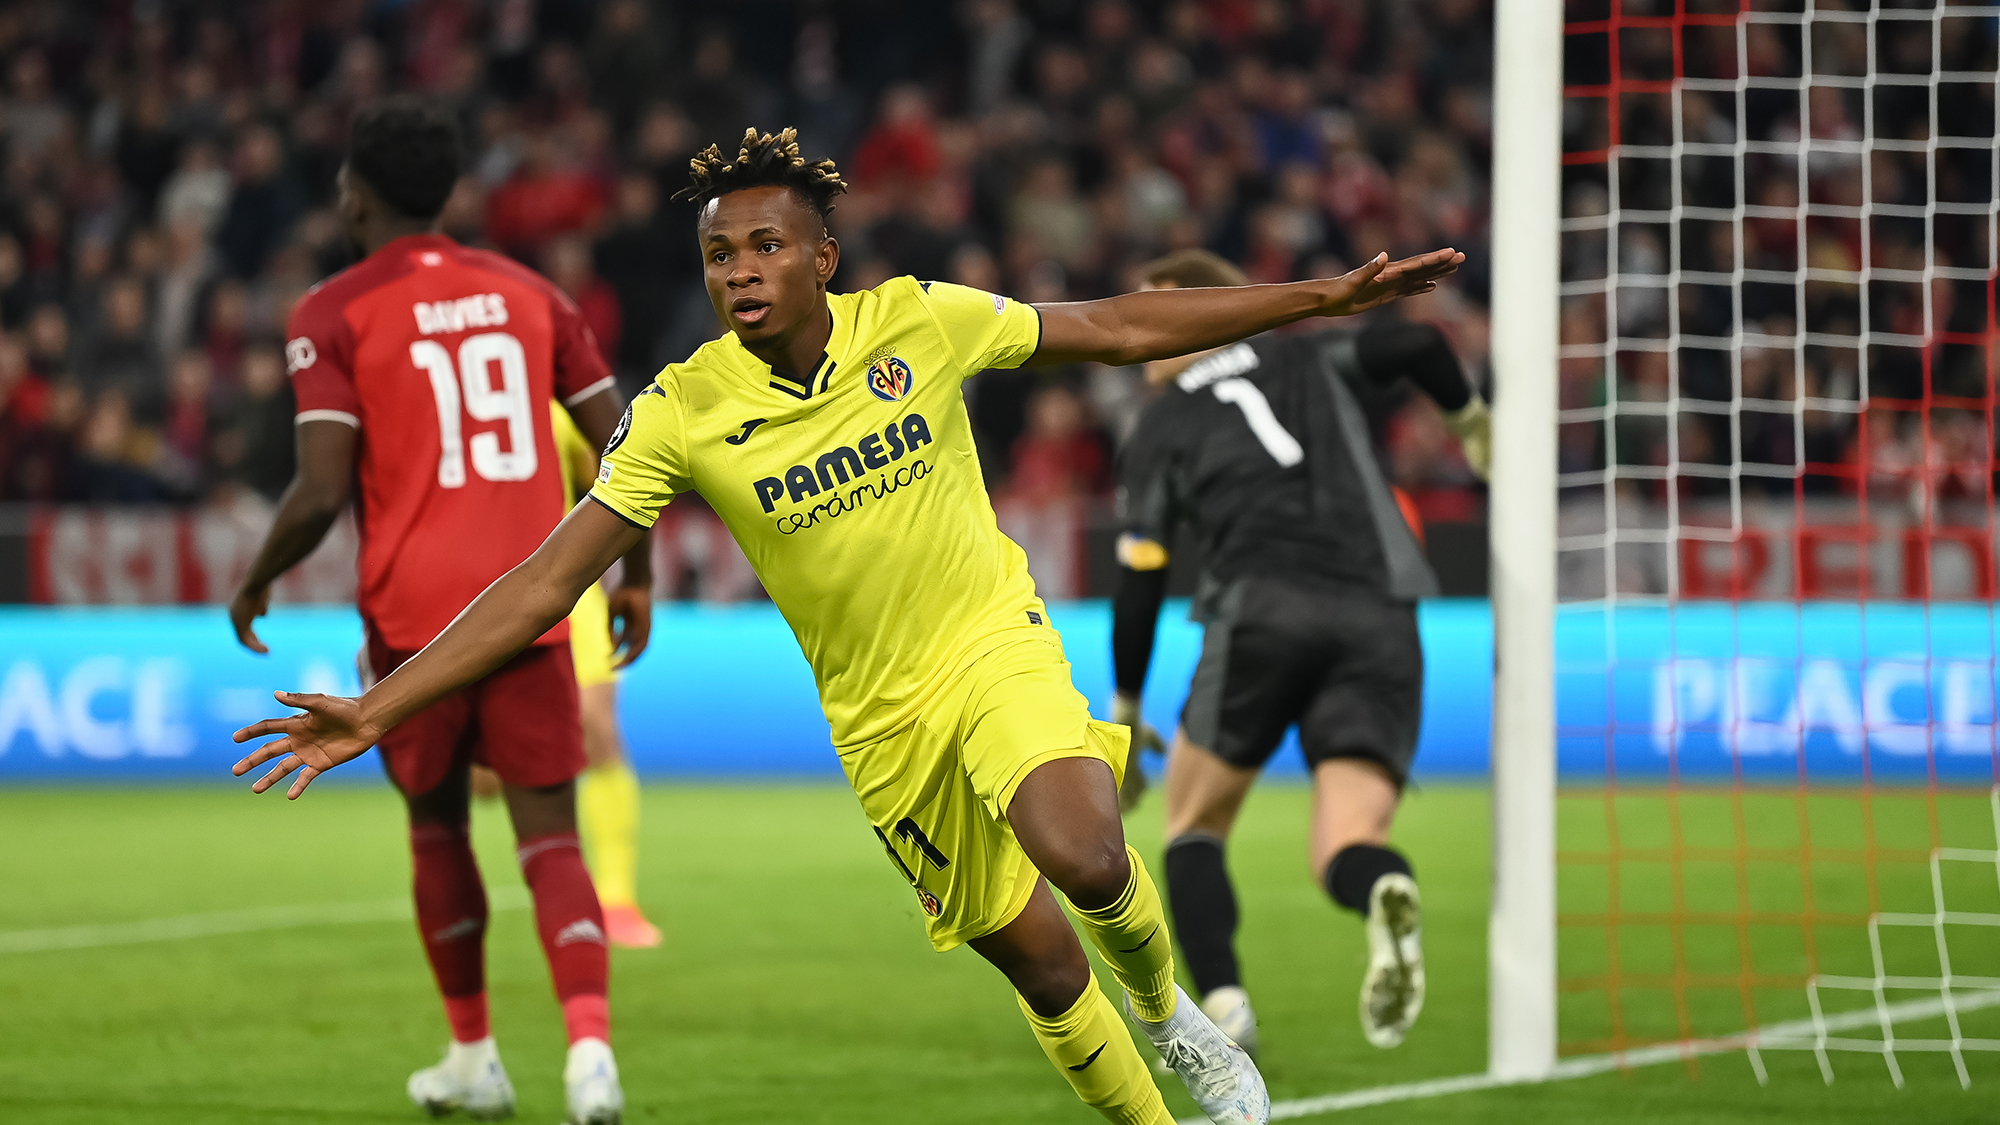 Samu Chukwueze of Villareal celebrates after scoring his team`s first goal during the UEFA Champions League Quarter Final Leg Two match between Bayern München and Villarreal CF at Football Arena Munich on April 12, 2022 in Munich, Germany.